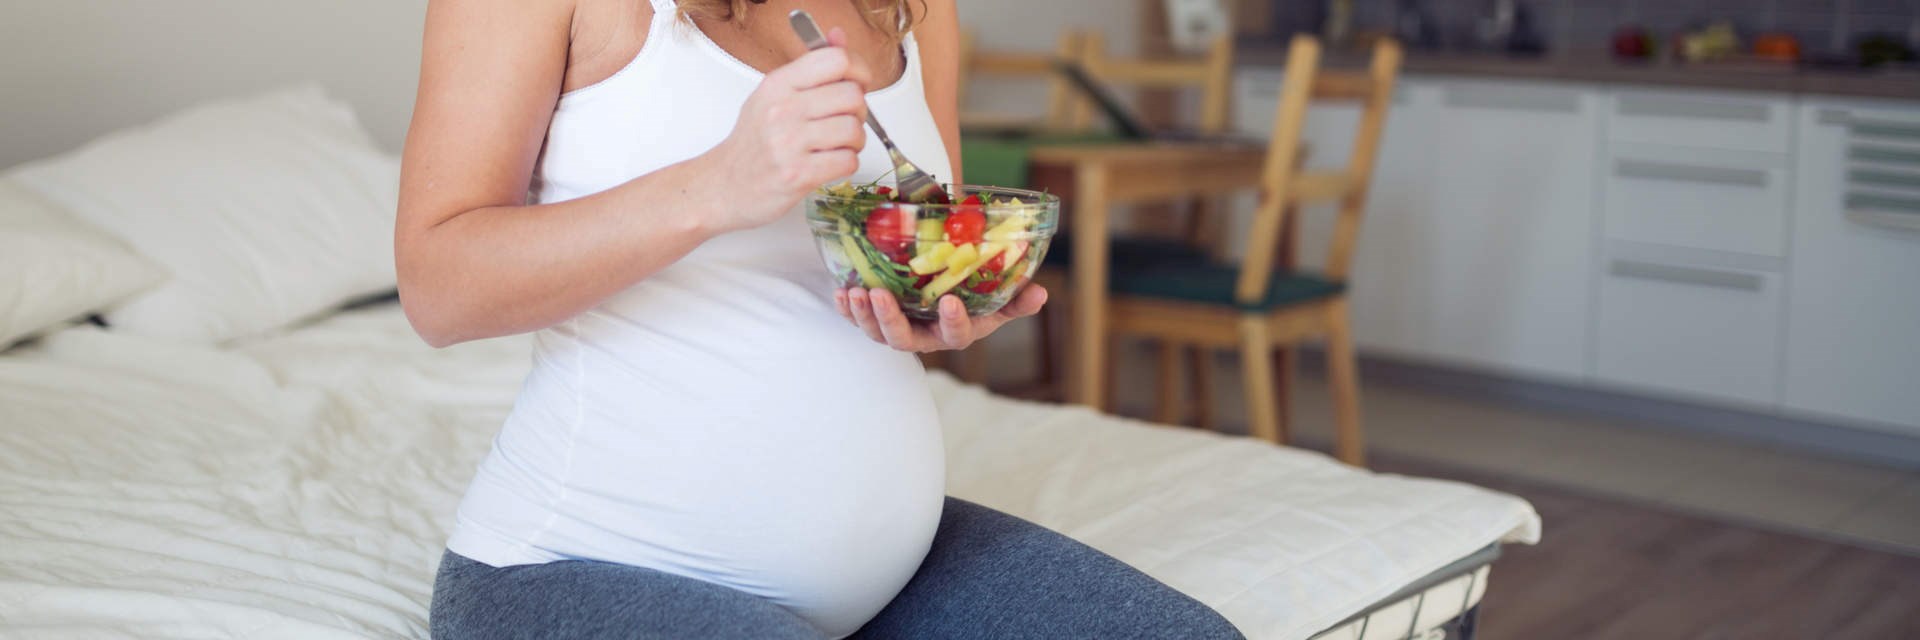 Photo of pregnant woman eating a salad on her bed